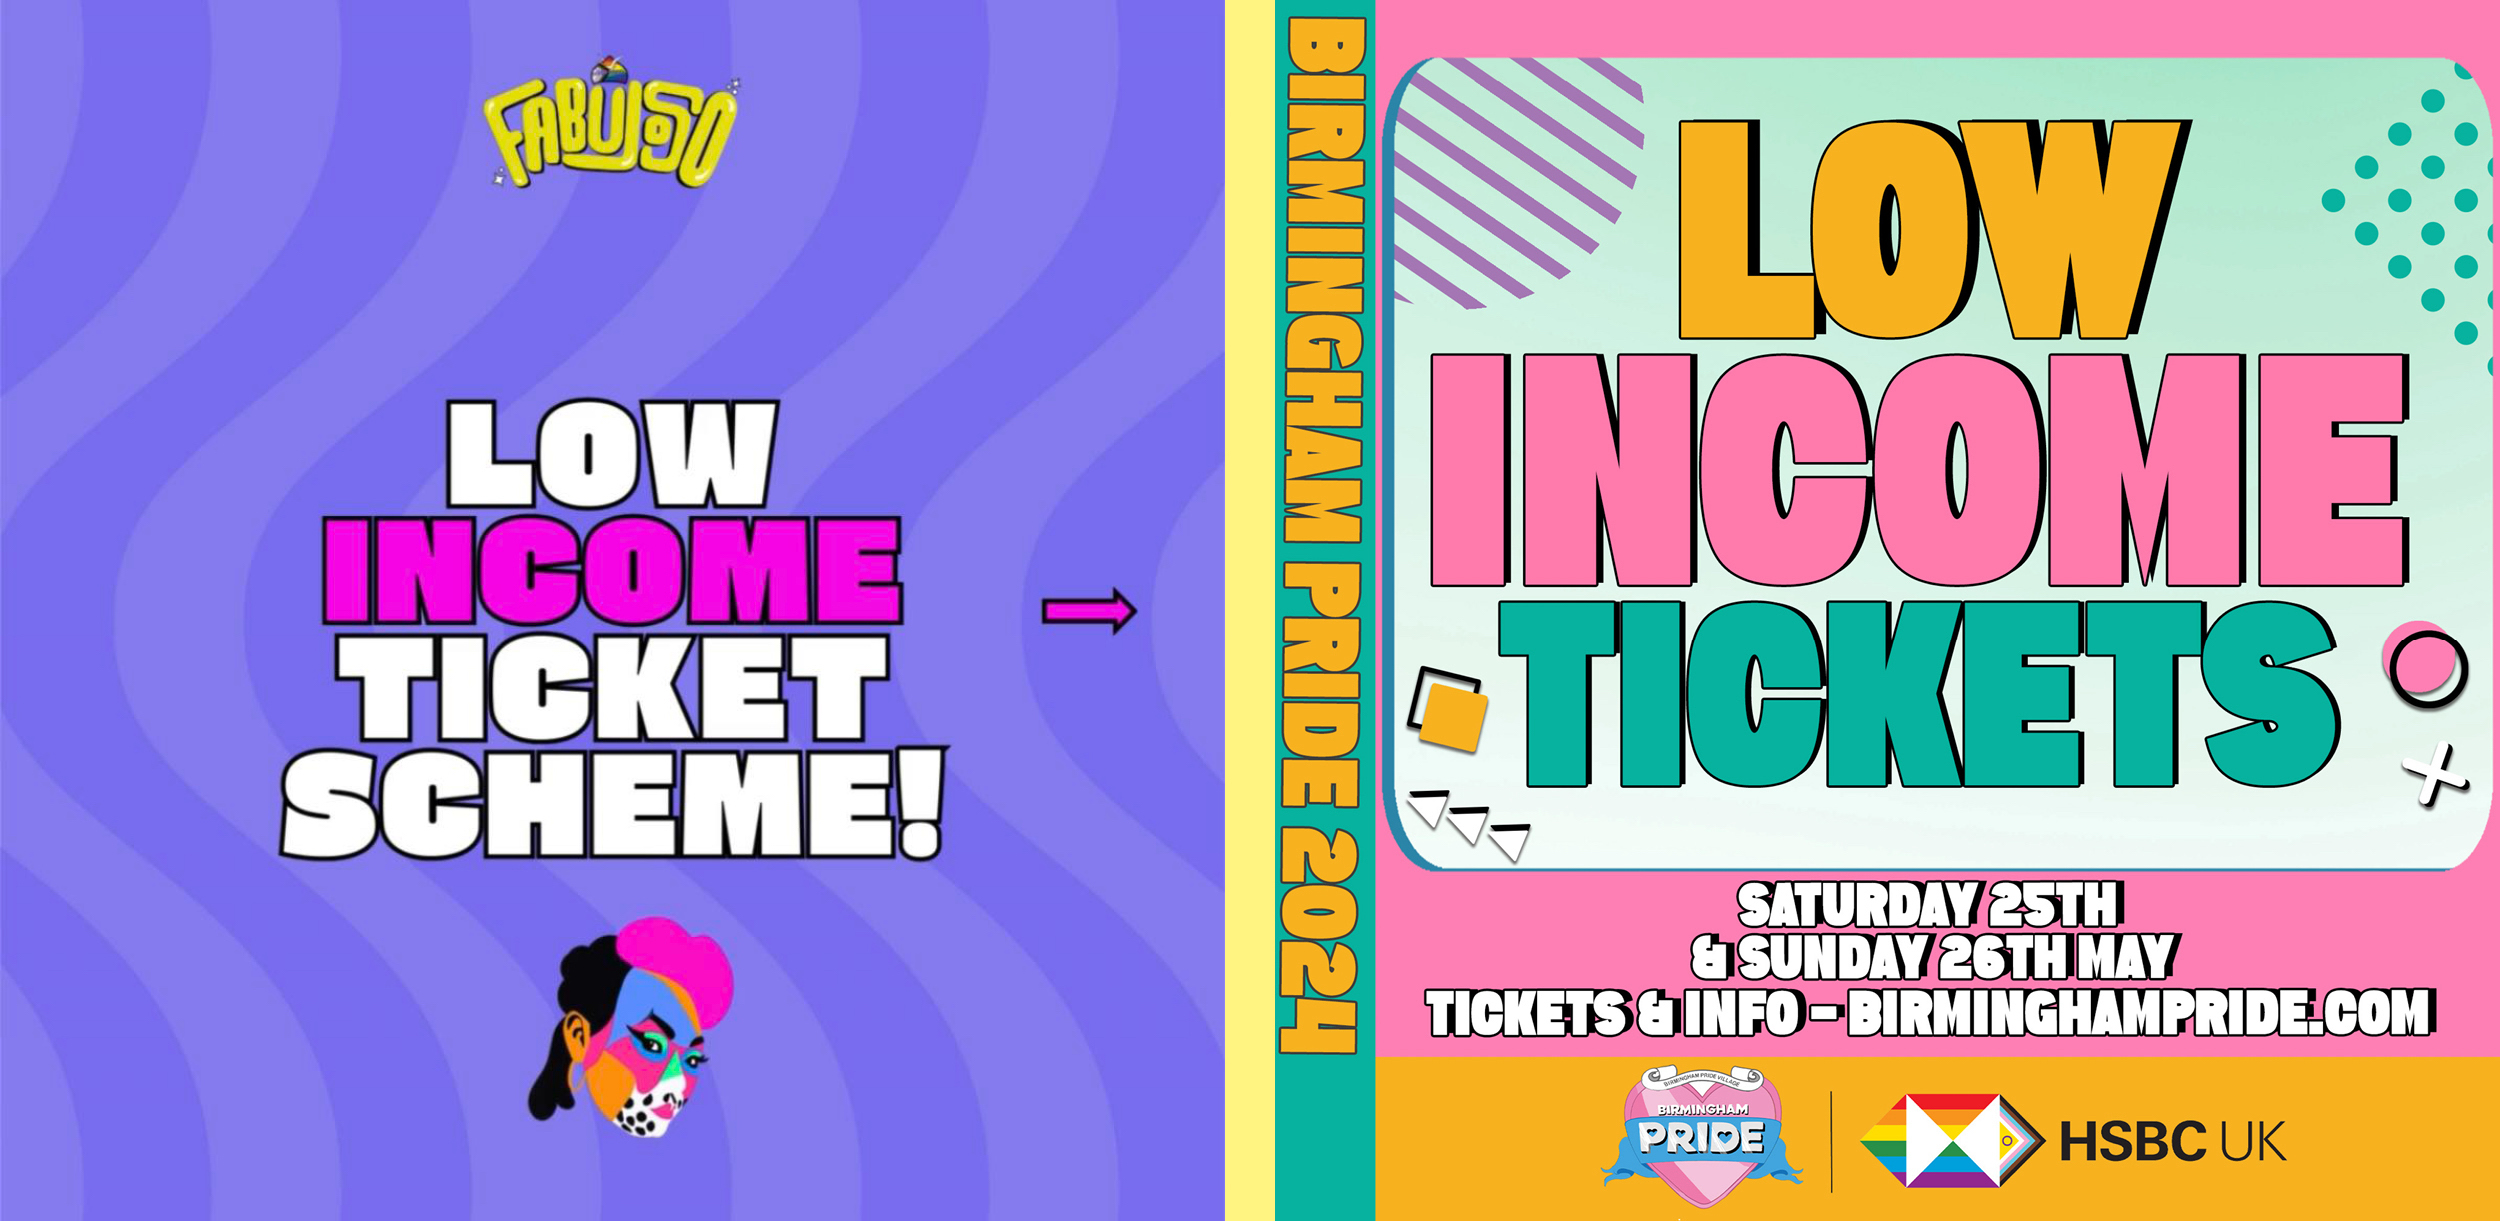 Two of the UK’s top Pride events – Birmingham Pride and Brighton & Hove Pride – have launched Low Income Ticket Schemes